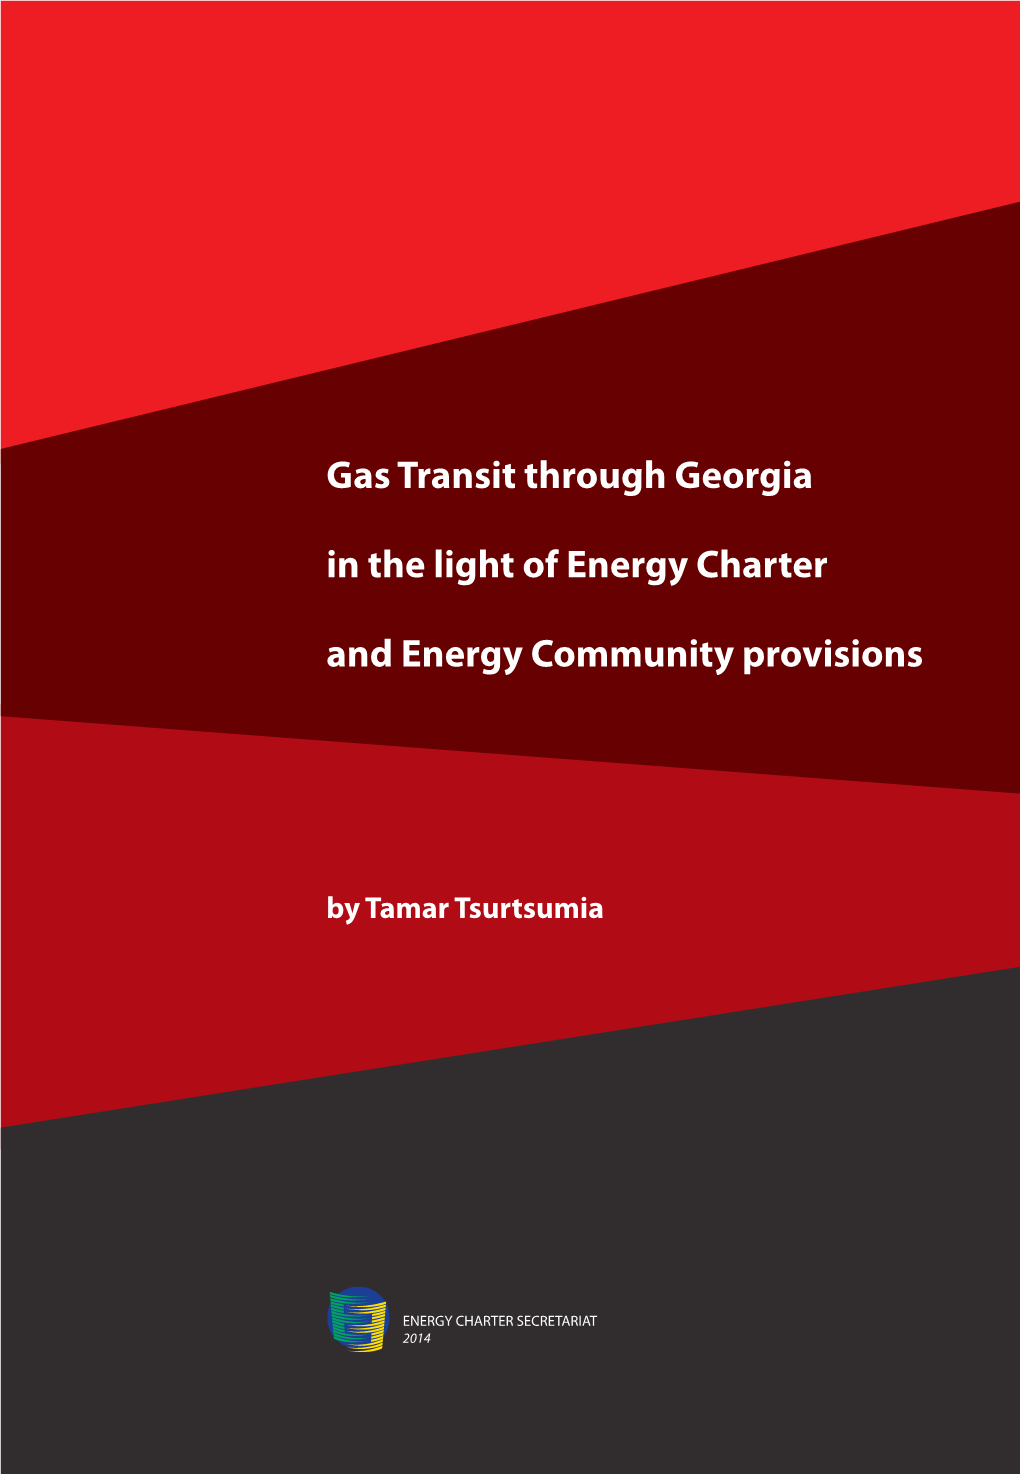 Gas Transit Through Georgia in the Light of Energy Charter and Energy Community Provisions